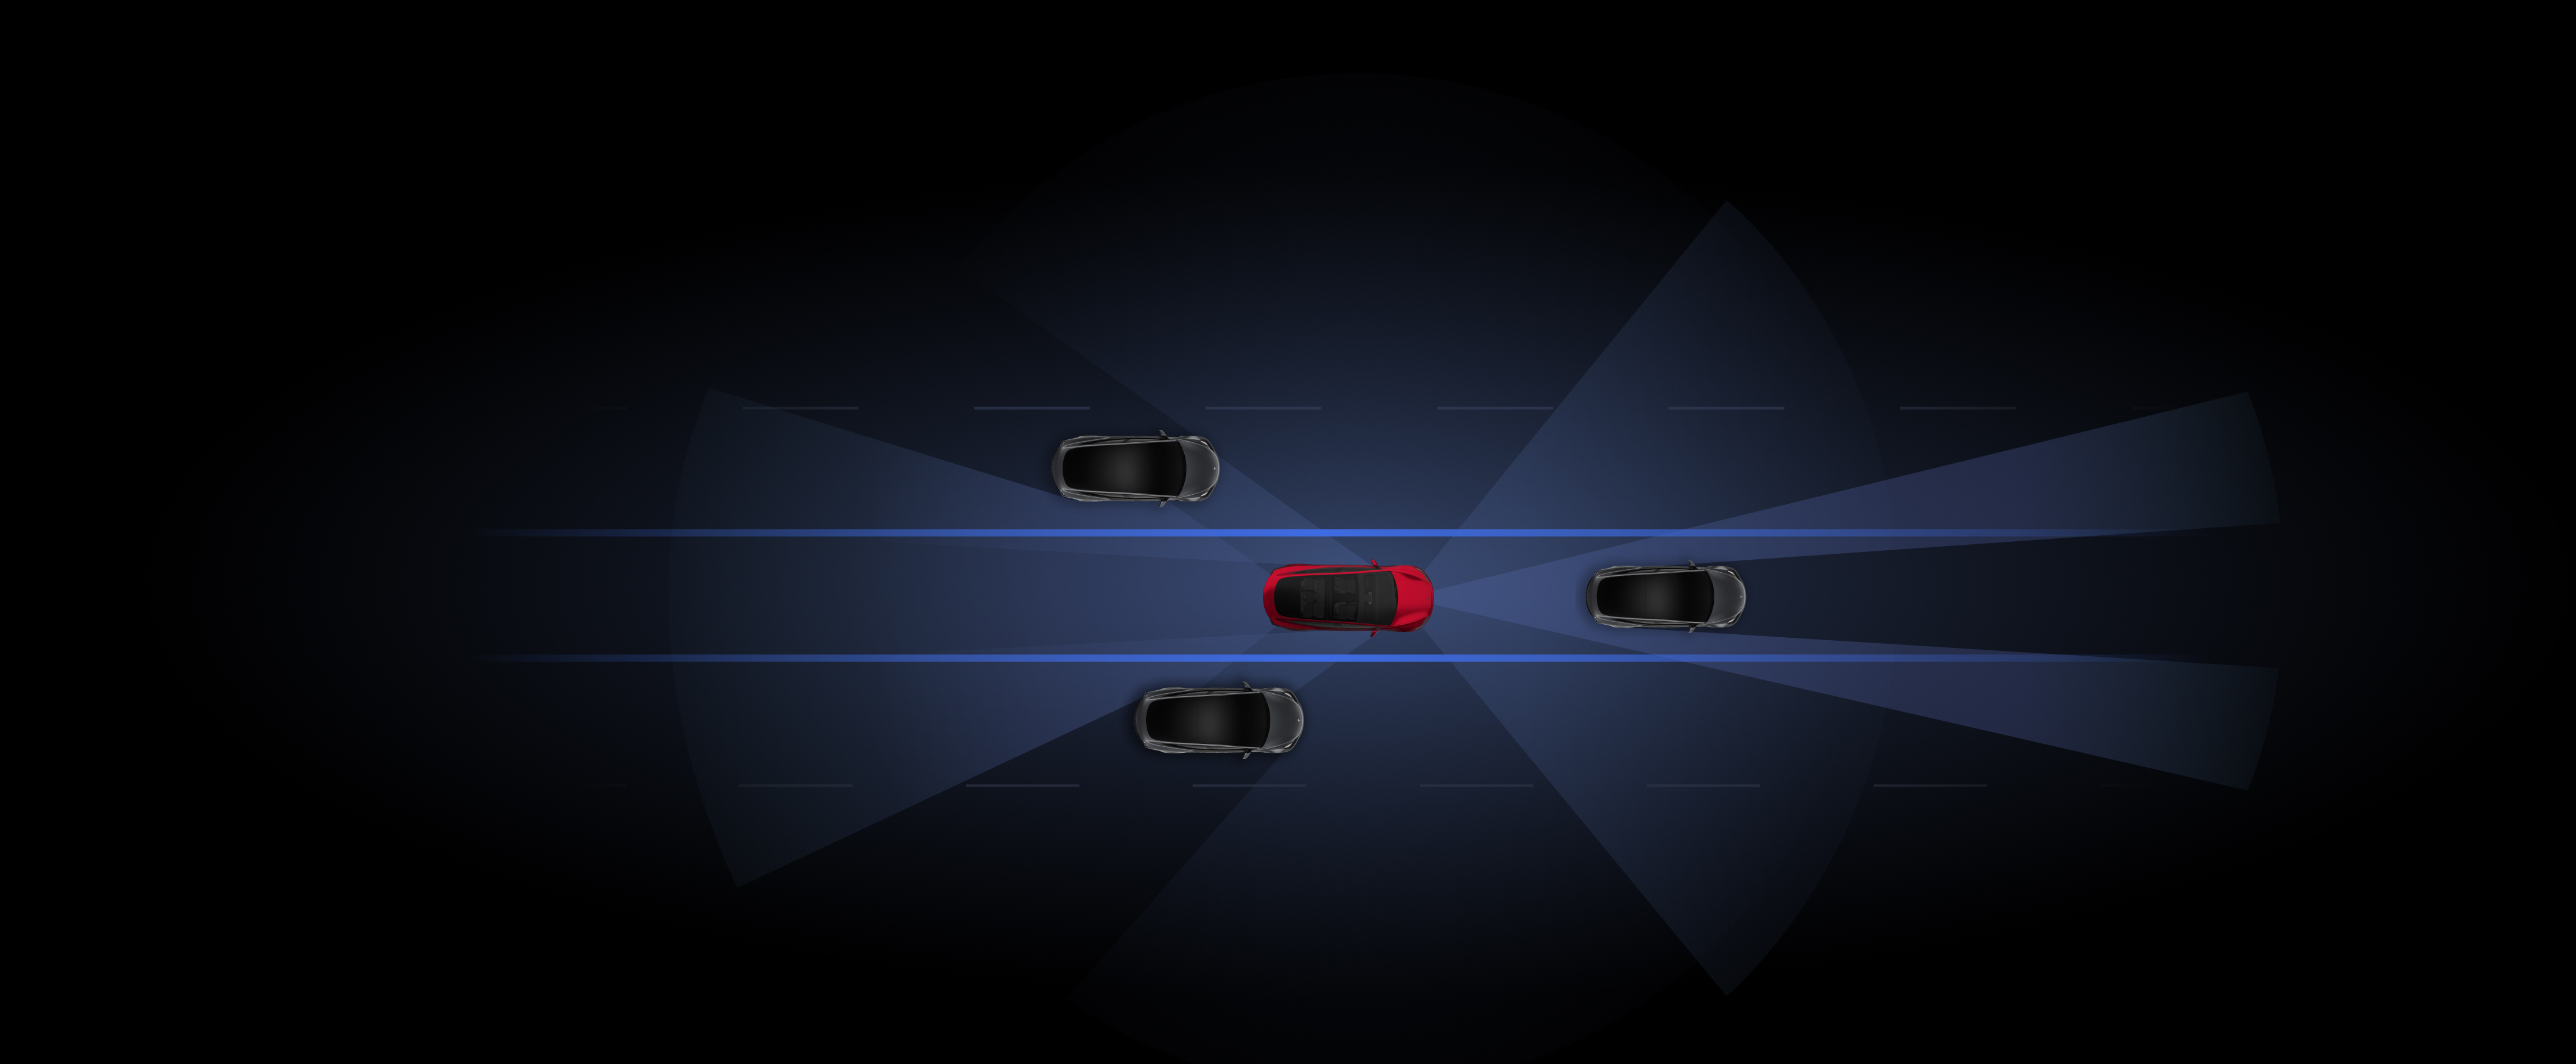 Rendered visualization of gray and red Tesla vehicles using Autopilot features. 